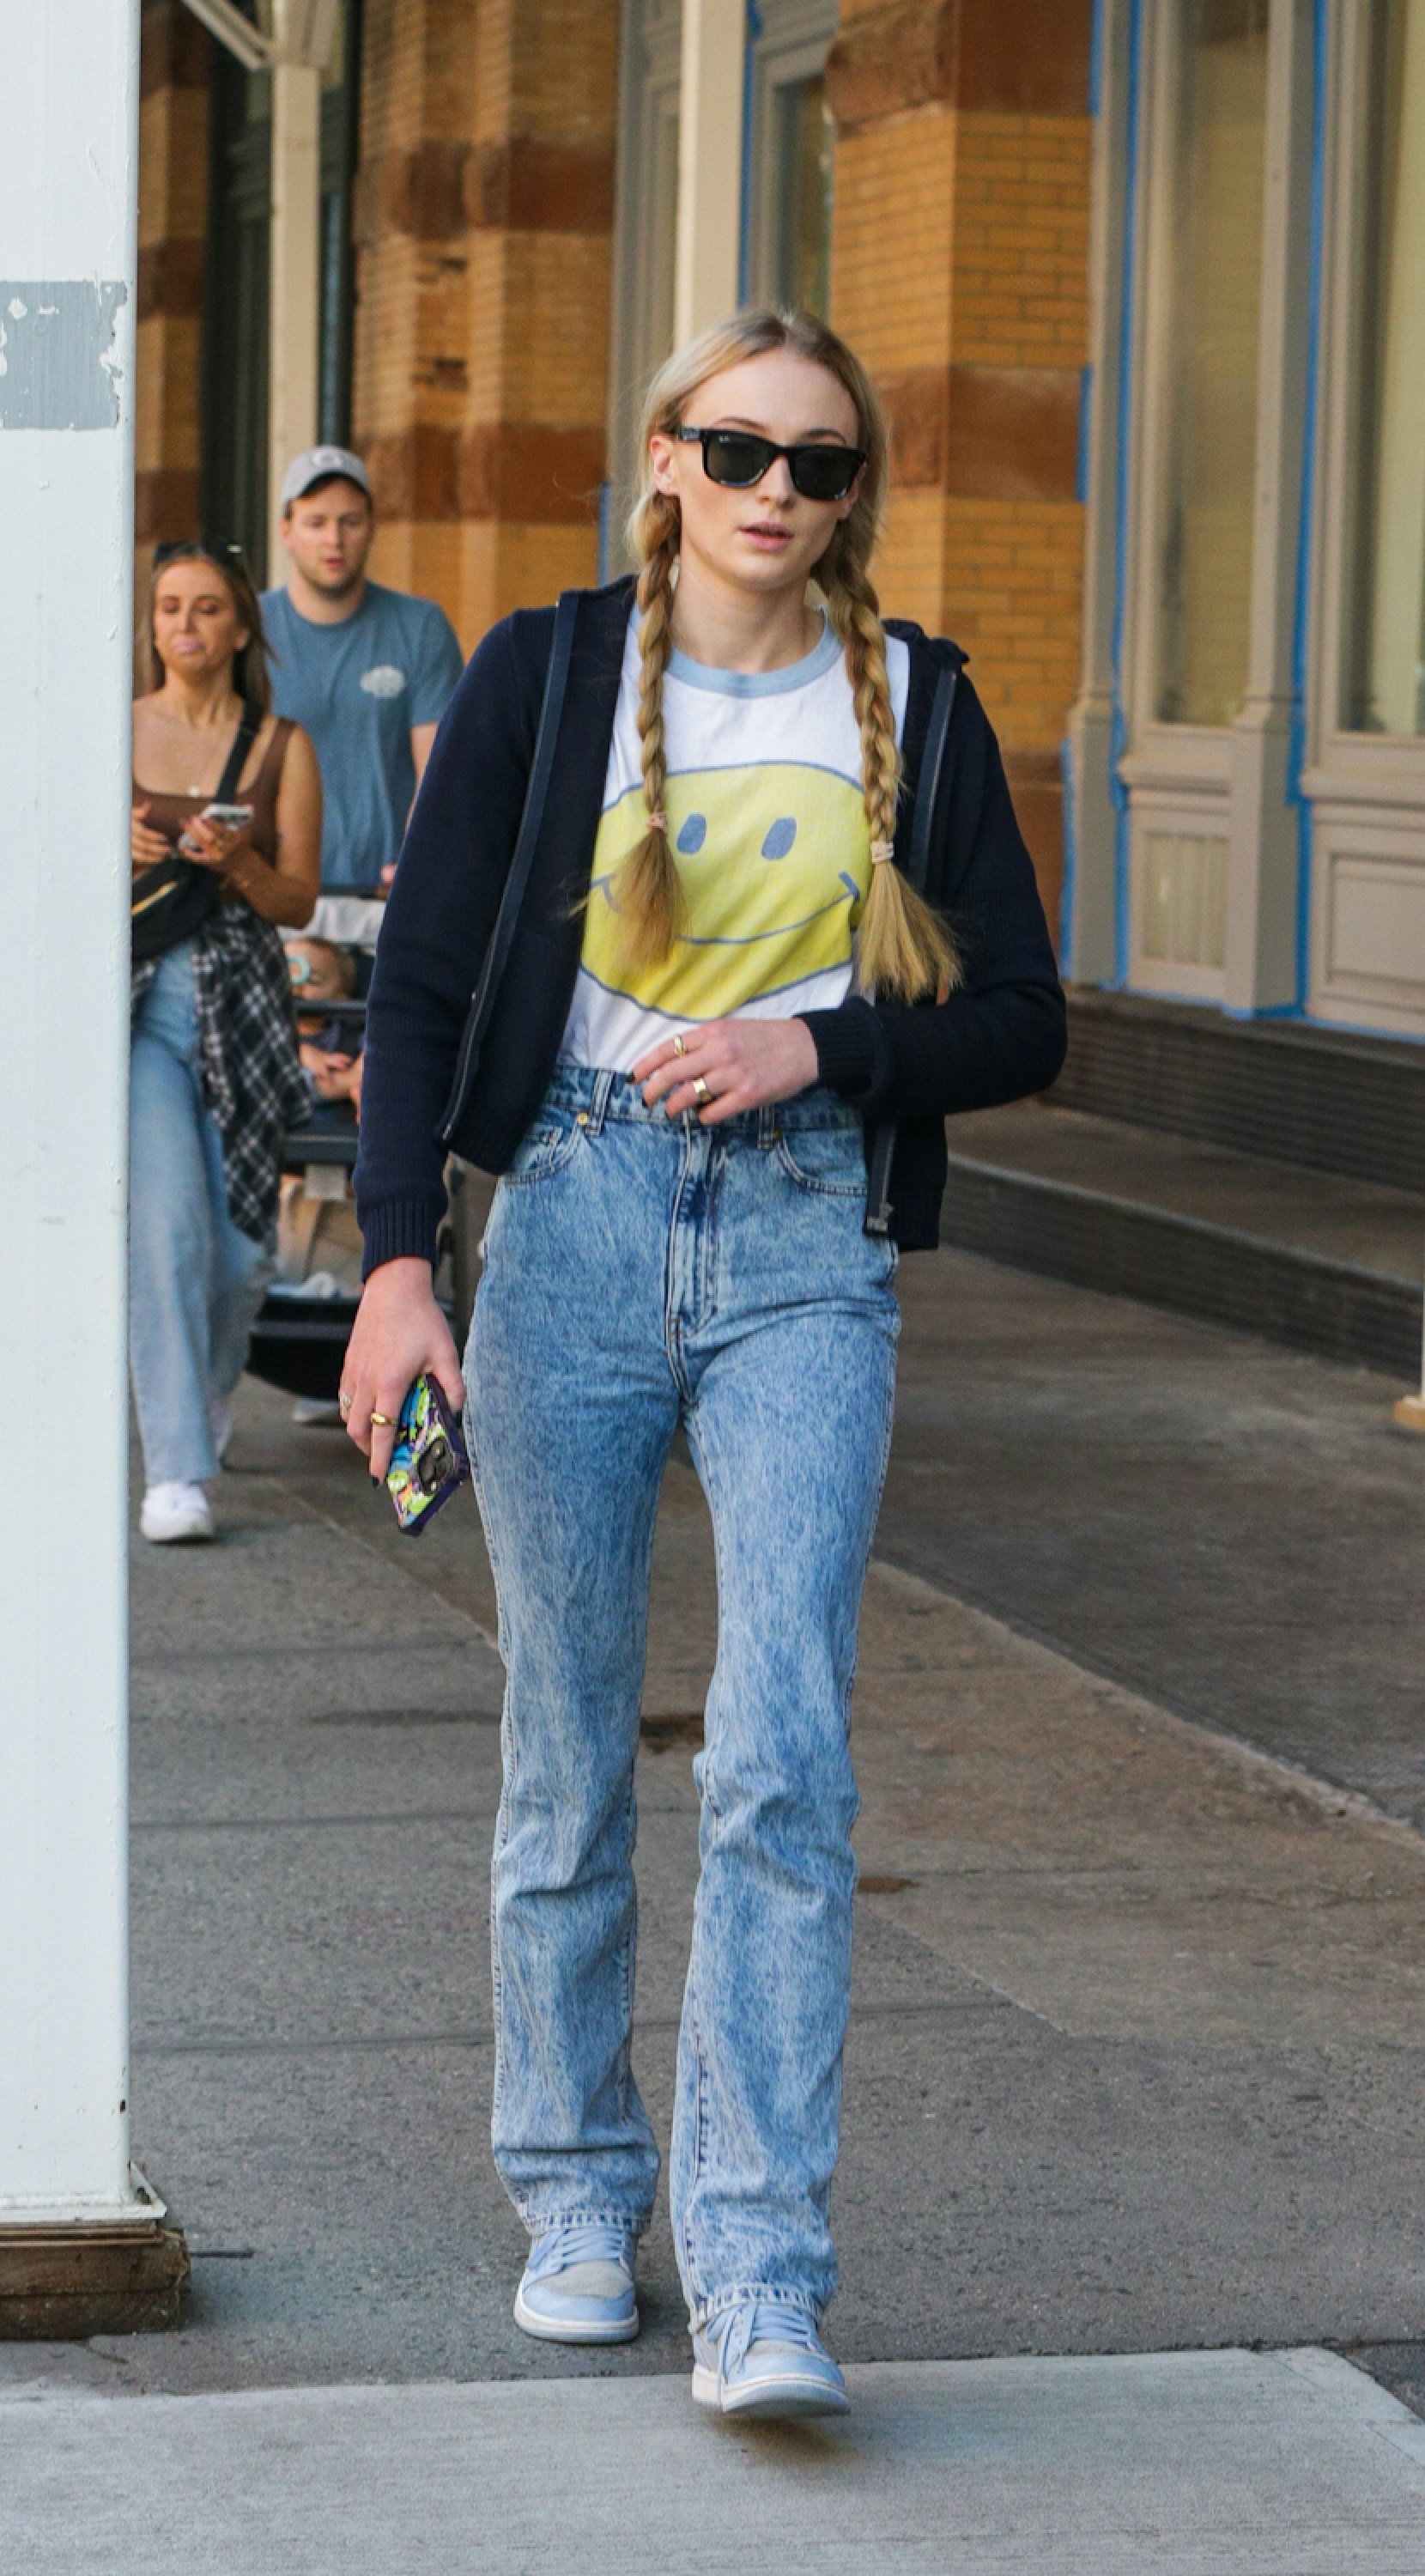 Sophie Turner's Capsule Wardrobe Is The Epitome of Cool Girl Style